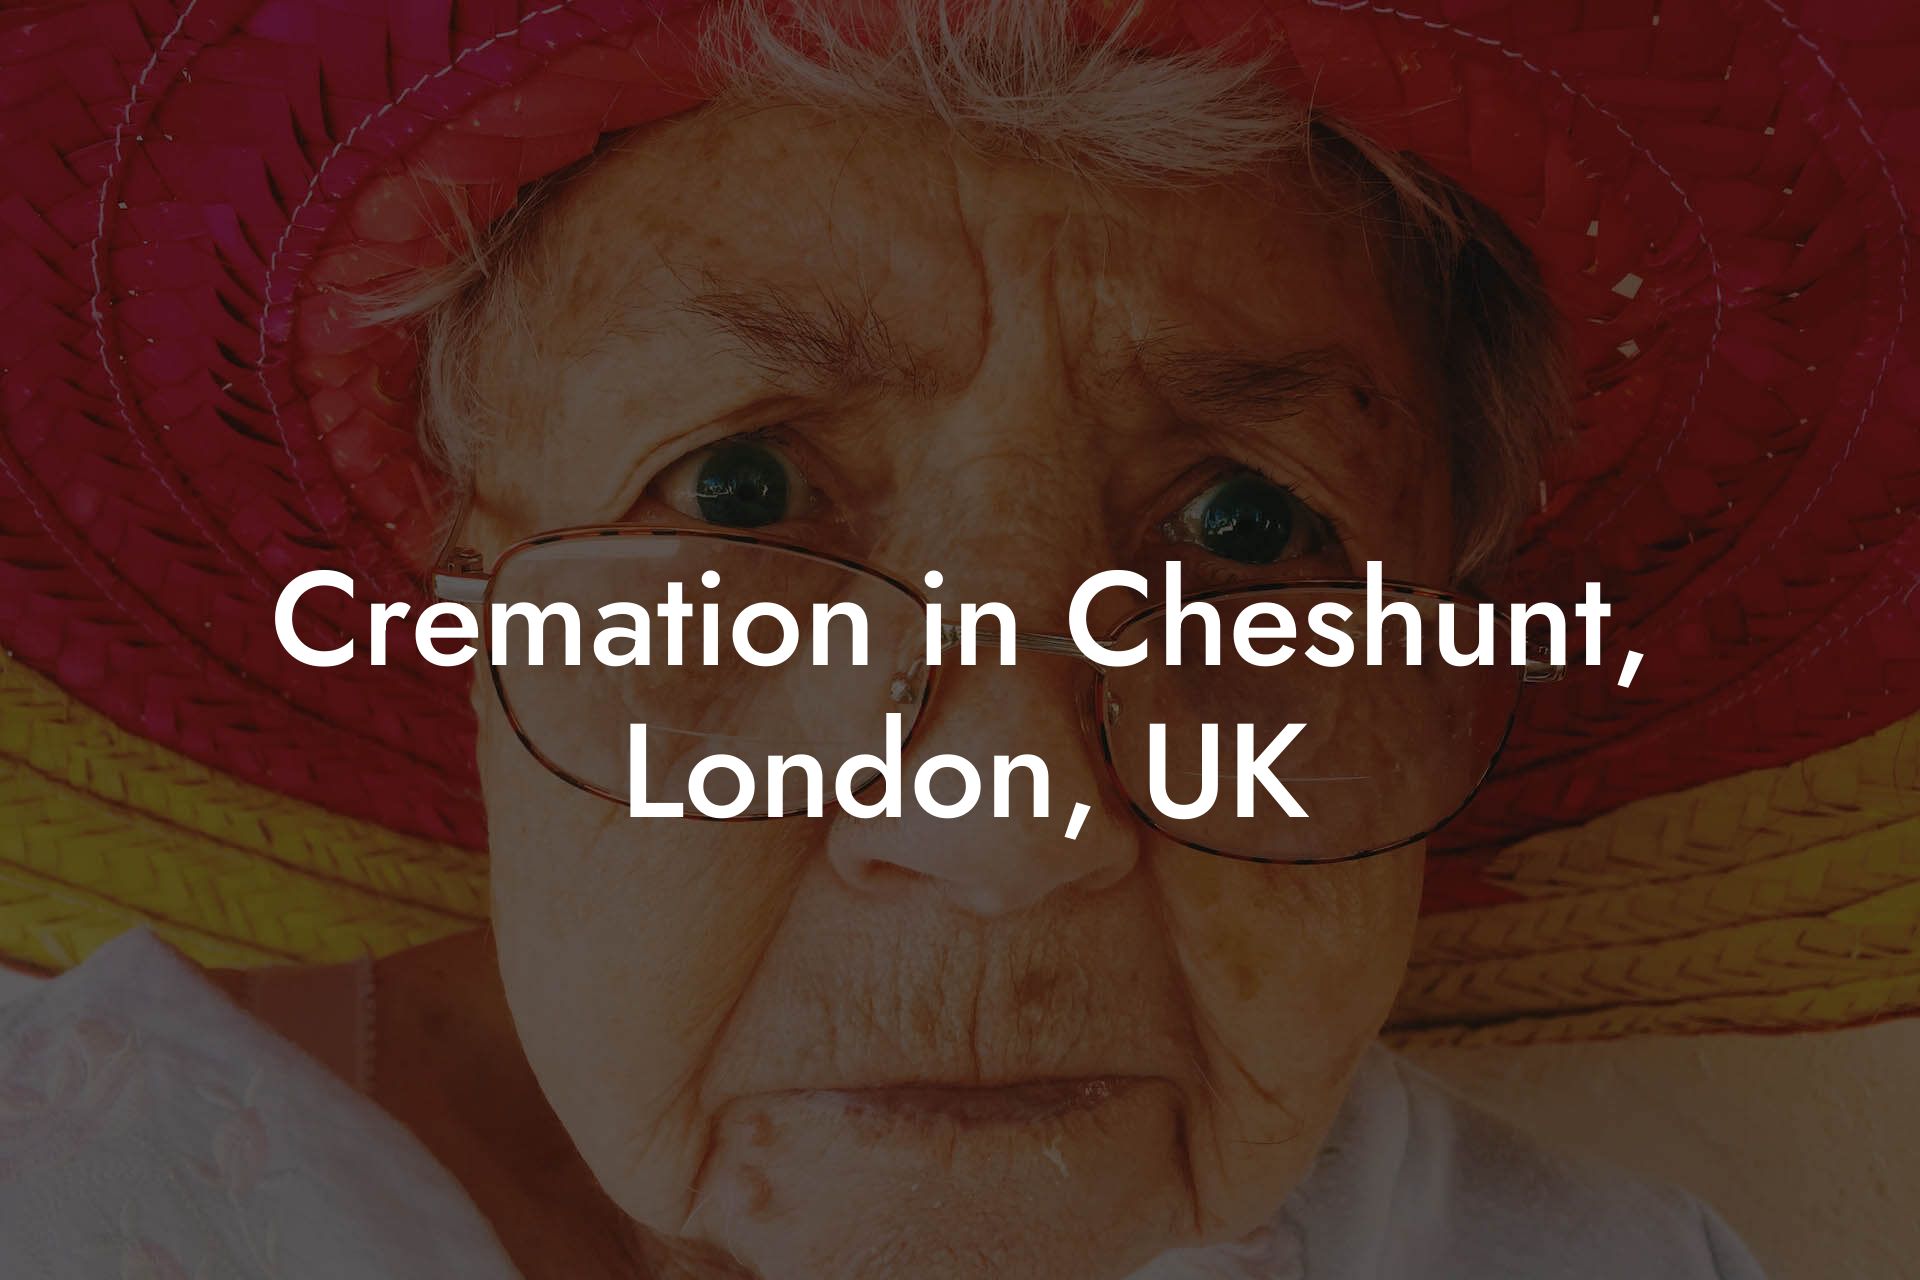 Cremation in Cheshunt, London, UK